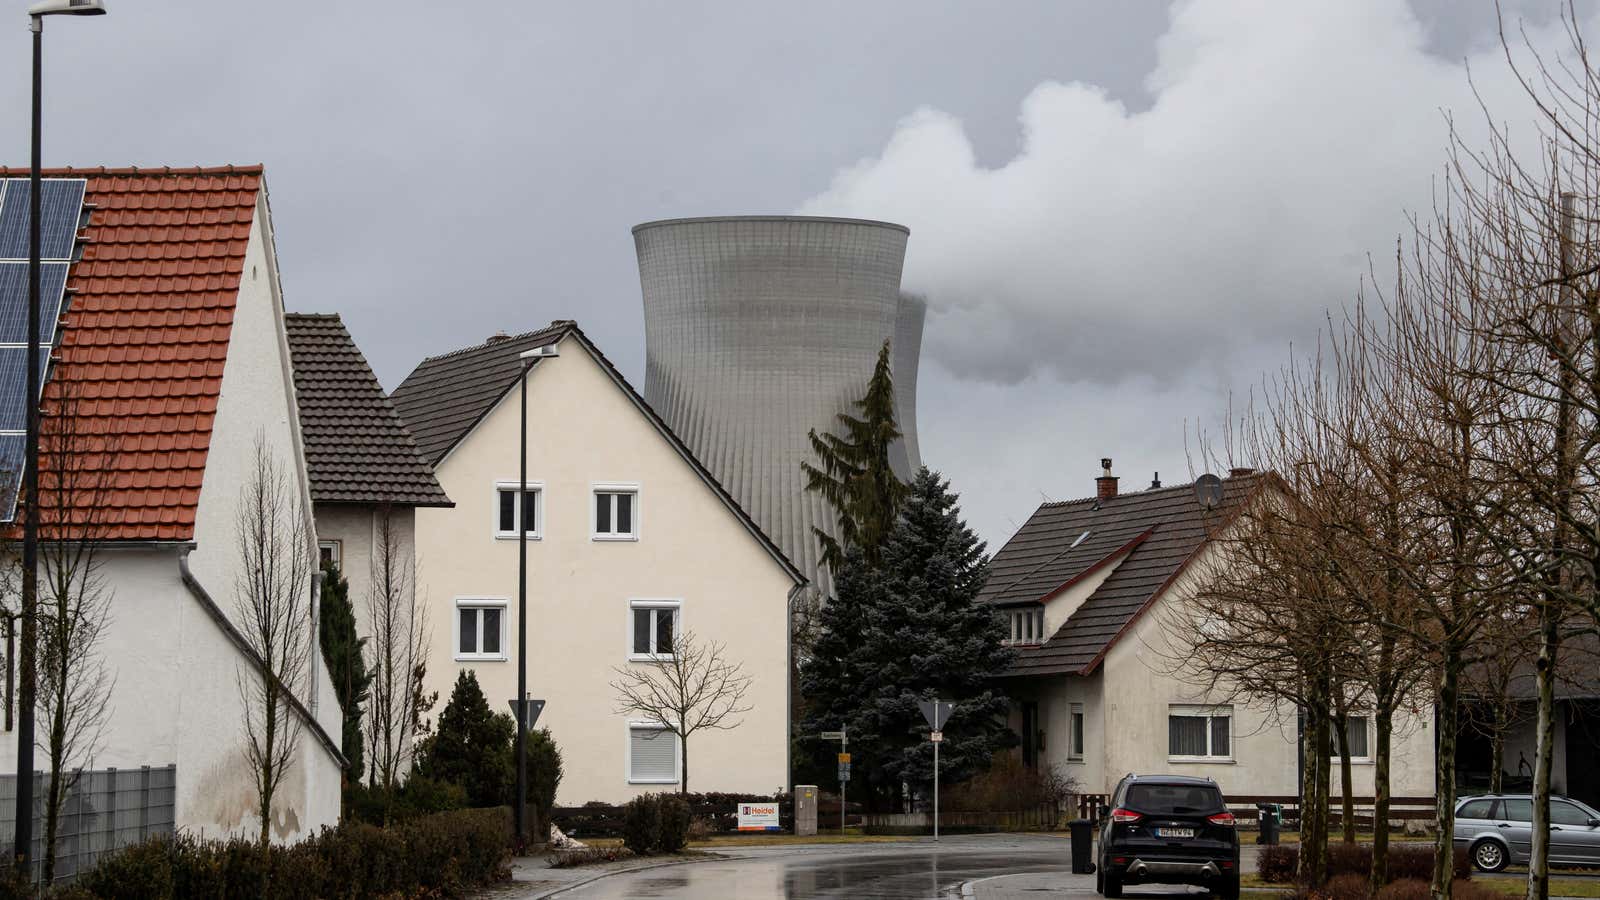 The nuclear power plant in Gundremmingen, Germany, was closed in January. The country plans to close its remaining nuclear plants by the end of 2022.